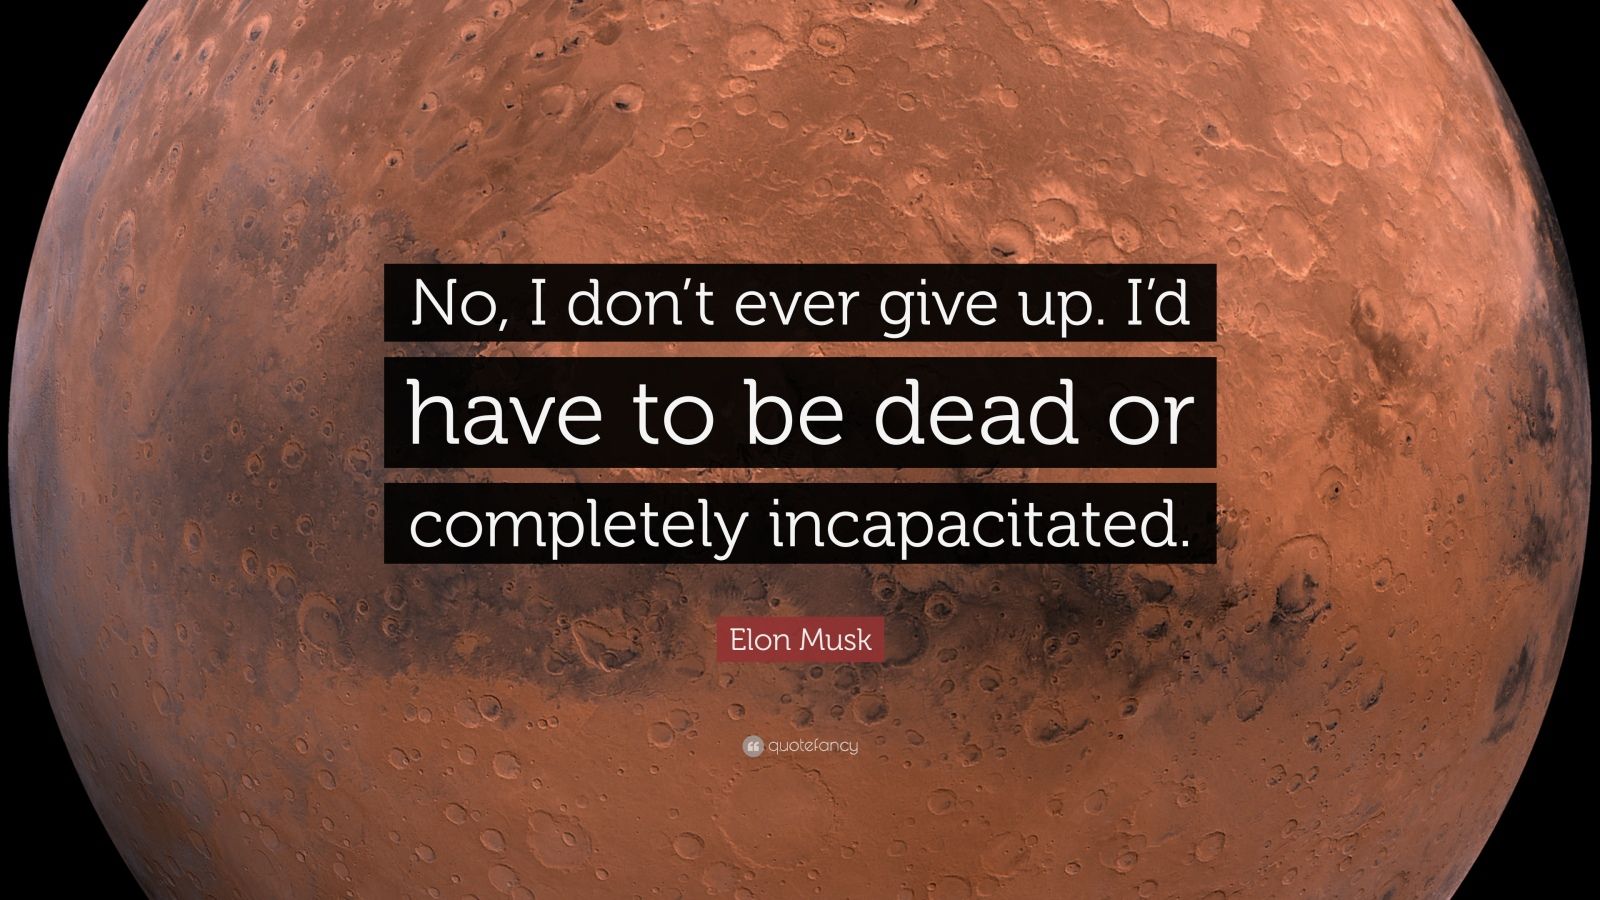 Elon Musk Quote: “No, I don’t ever give up. I’d have to be dead or